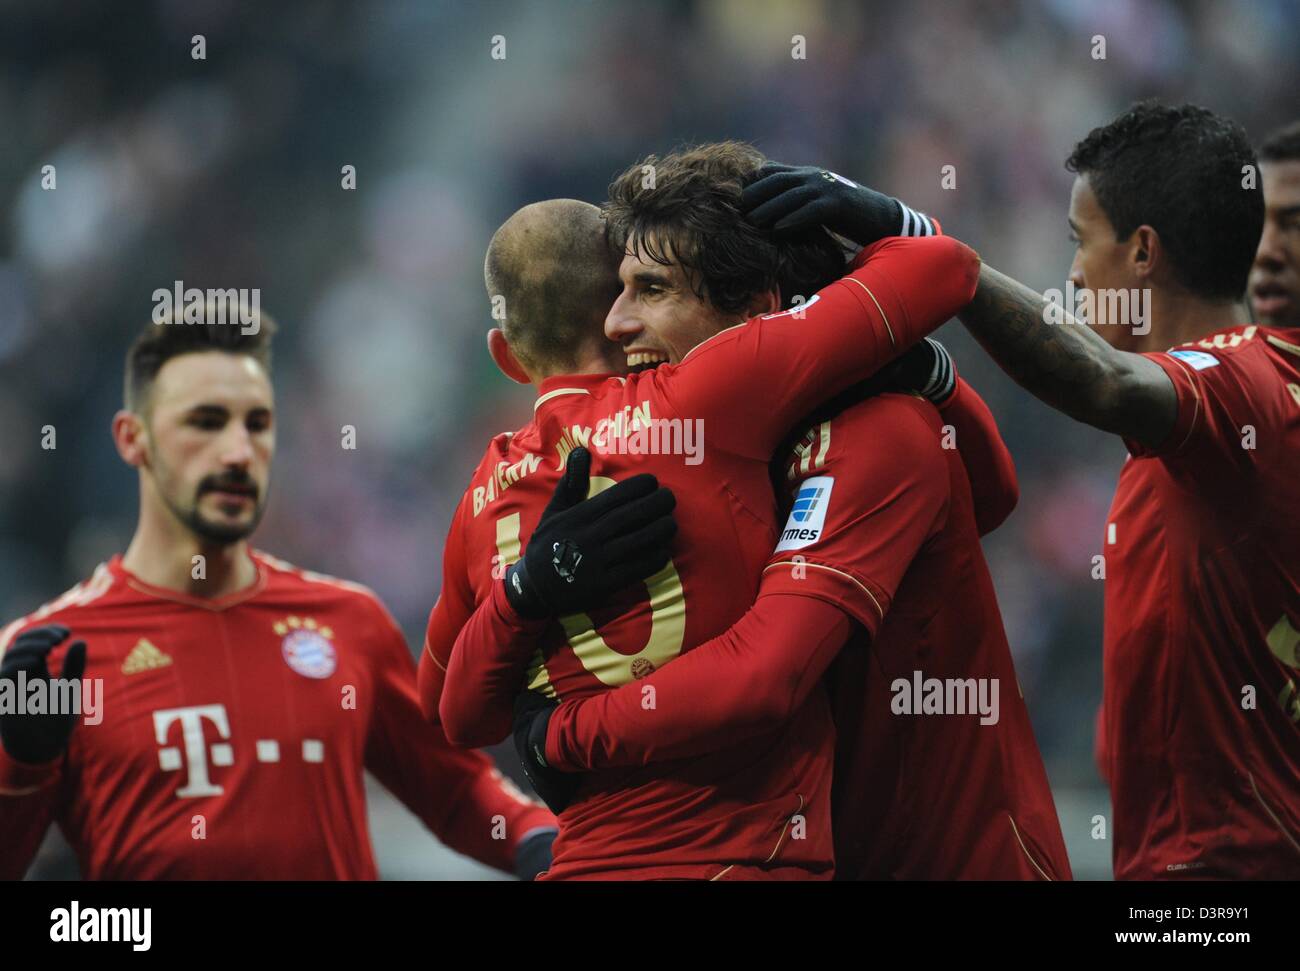 Munich, Germany. 23rd February 2013. Munich's Javier Martinez (3-L) celebrates his 2-0 goal with teammates Diego Contento (L), Arjen Robben and Luiz Gustavo (R) during the Bundesliga soccer match between FC Bayern Munich and SV Werder Bremen at Allianz Arena in Munich, Germany, 23 February 2013. Photo: ANDREAS GEBERT /dpa/Alamy Live News  (ATTENTION: EMBARGO CONDITIONS! The DFL permits the further  utilisation of up to 15 pictures only (no sequntial pictures or video-similar series of pictures allowed) via the internet and online media during the match (including halftime), taken from inside t Stock Photo